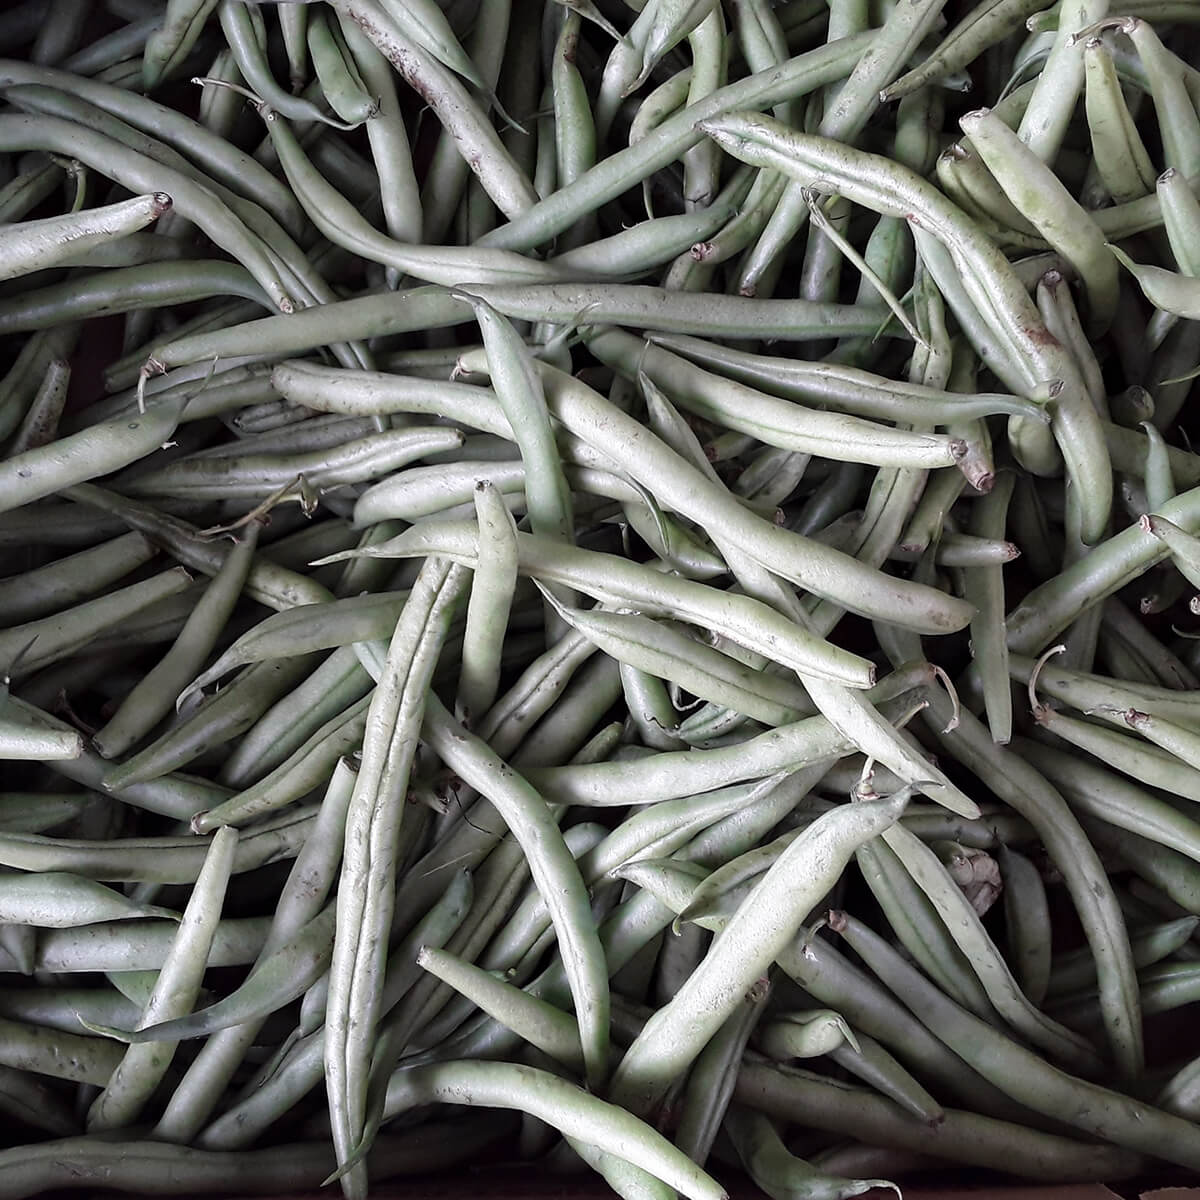 Affordable Green Beans